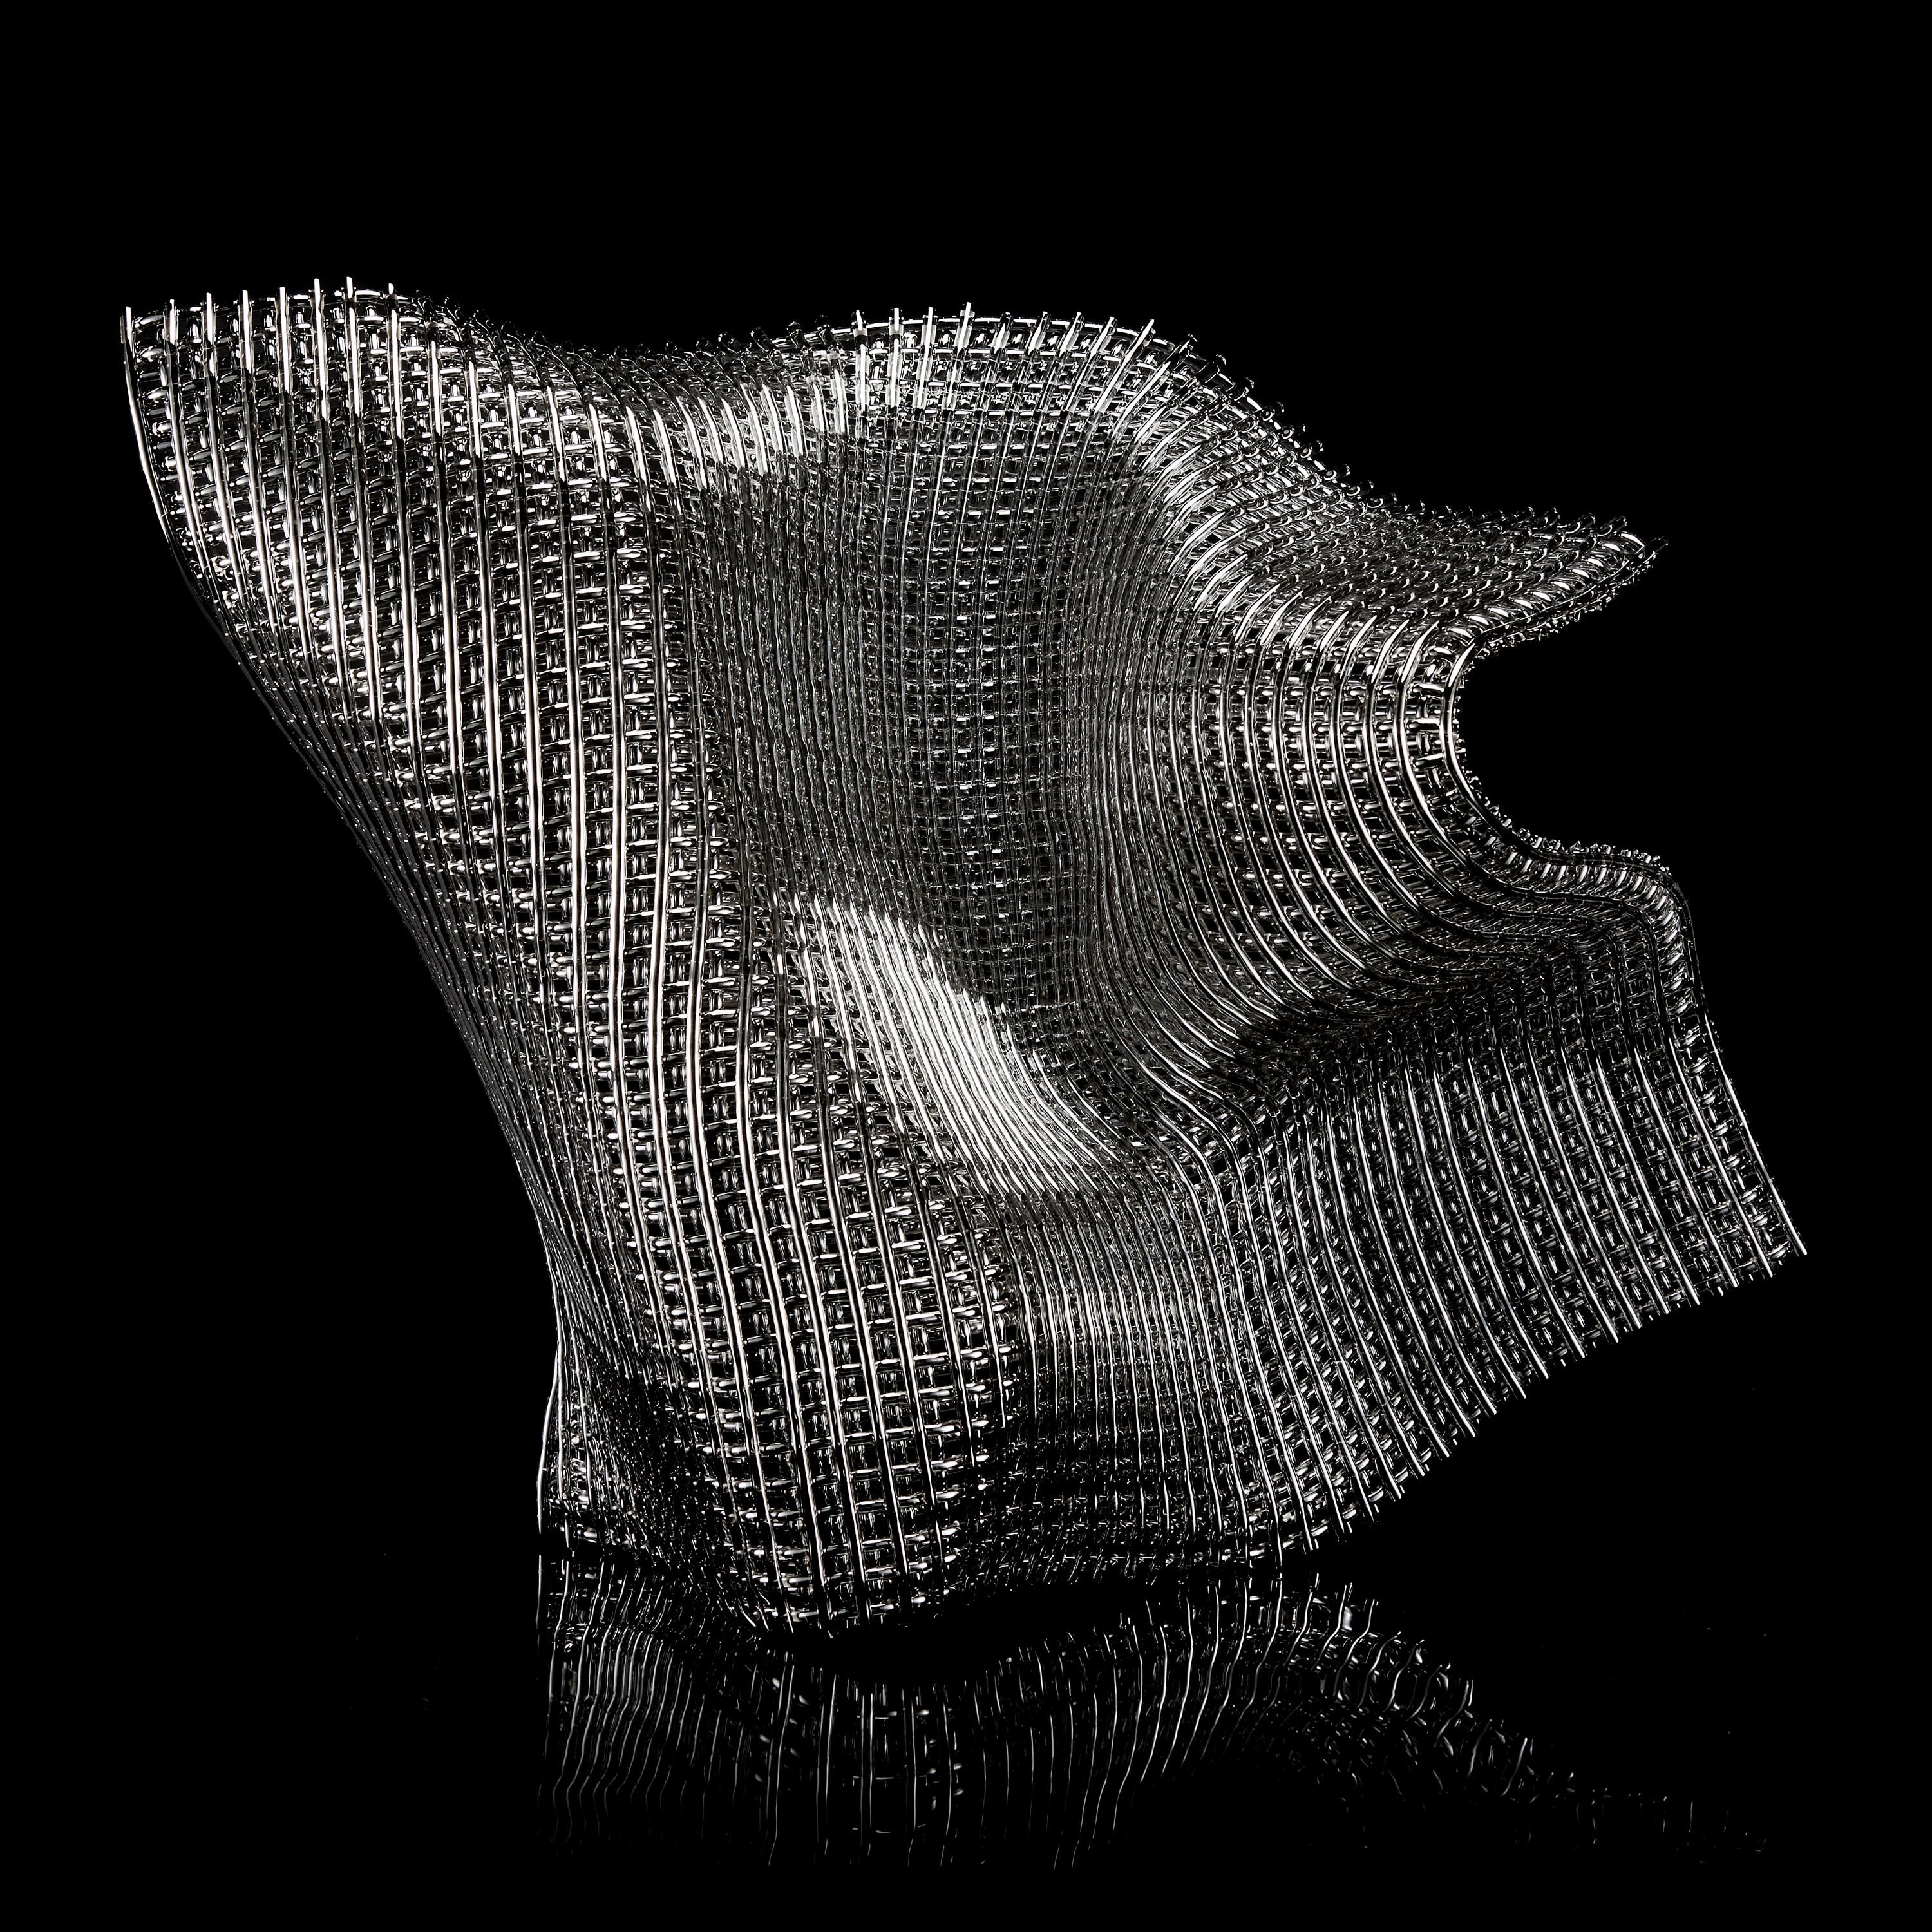 Concordance, is a unique silver and glass sculpture by the British artist Cathryn Shilling. Using her signature woven glass 'fabric' technique, Shilling layers kiln formed glass cane to create this beautiful latticed artwork, which has been finished